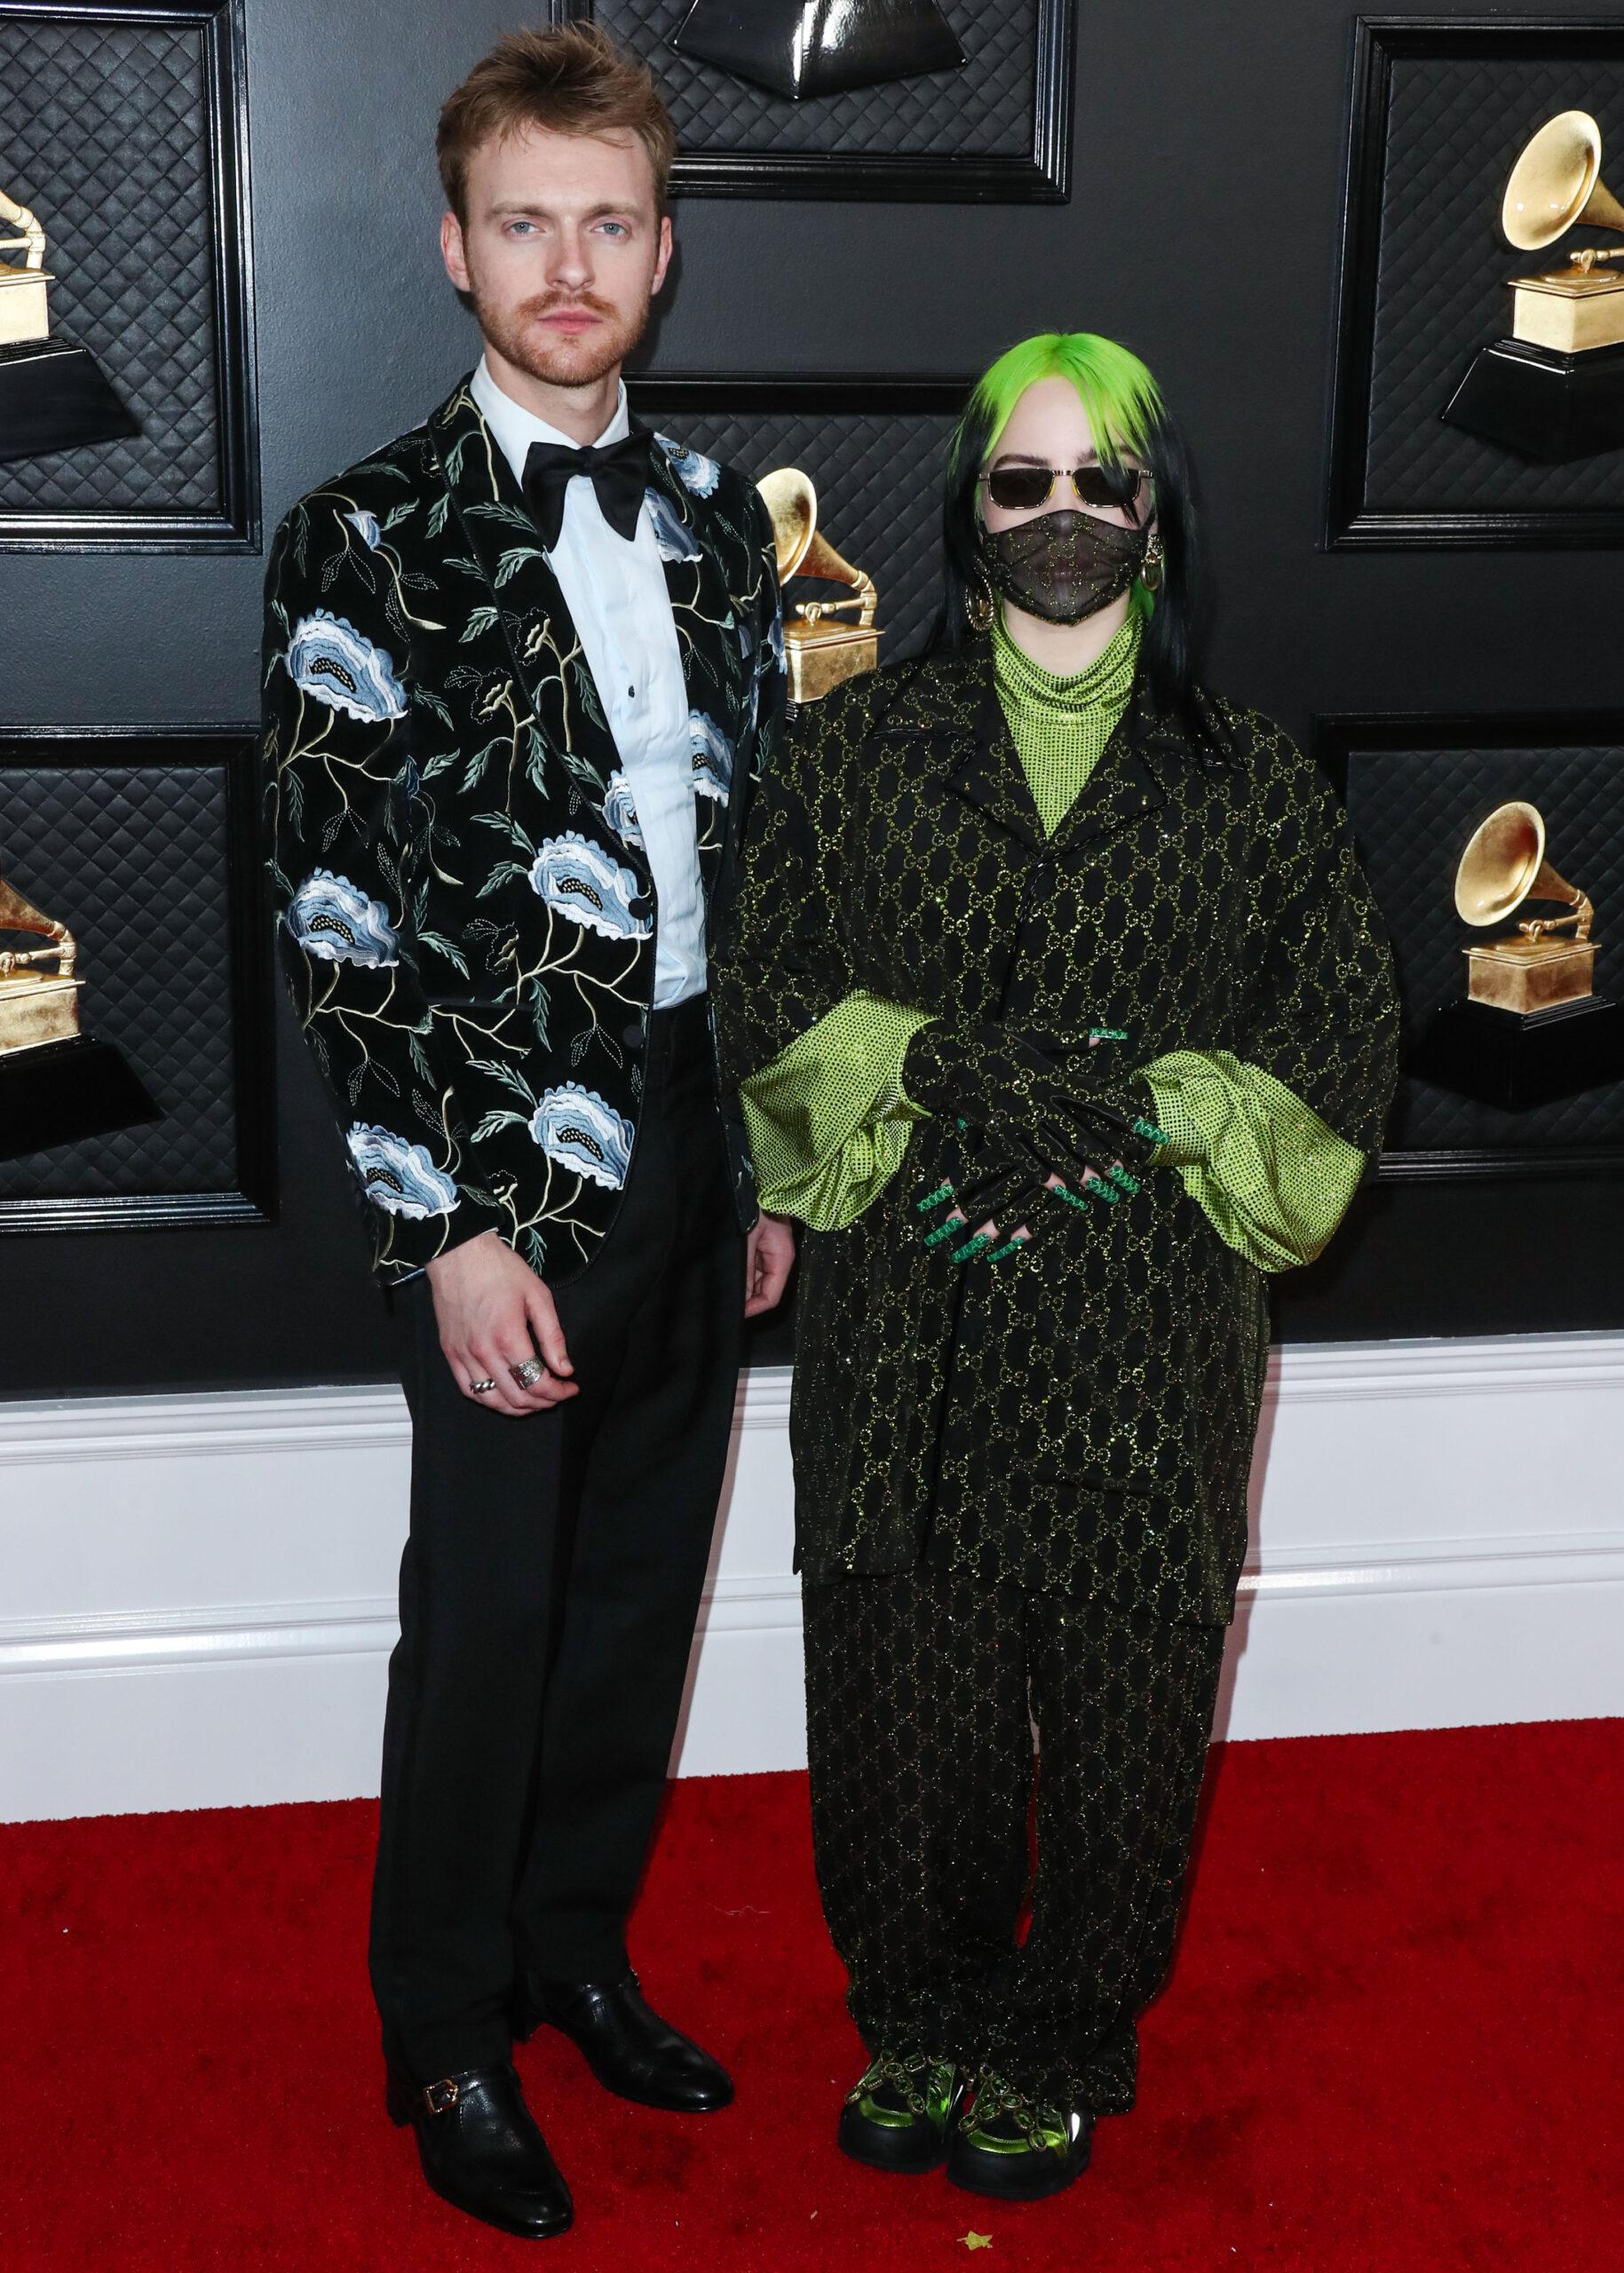 LOS ANGELES, CALIFORNIA, USA - JANUARY 26: 62nd Annual GRAMMY Awards held at Staples Center on January 26, 2020 in Los Angeles, California, United States. 26 Jan 2020 Pictured: Finneas O'Connell, Billie Eilish. Photo credit: Xavier Collin/Image Press Agency/MEGA TheMegaAgency.com +1 888 505 6342 (Mega Agency TagID: MEGA595285_030.jpg) [Photo via Mega Agency]